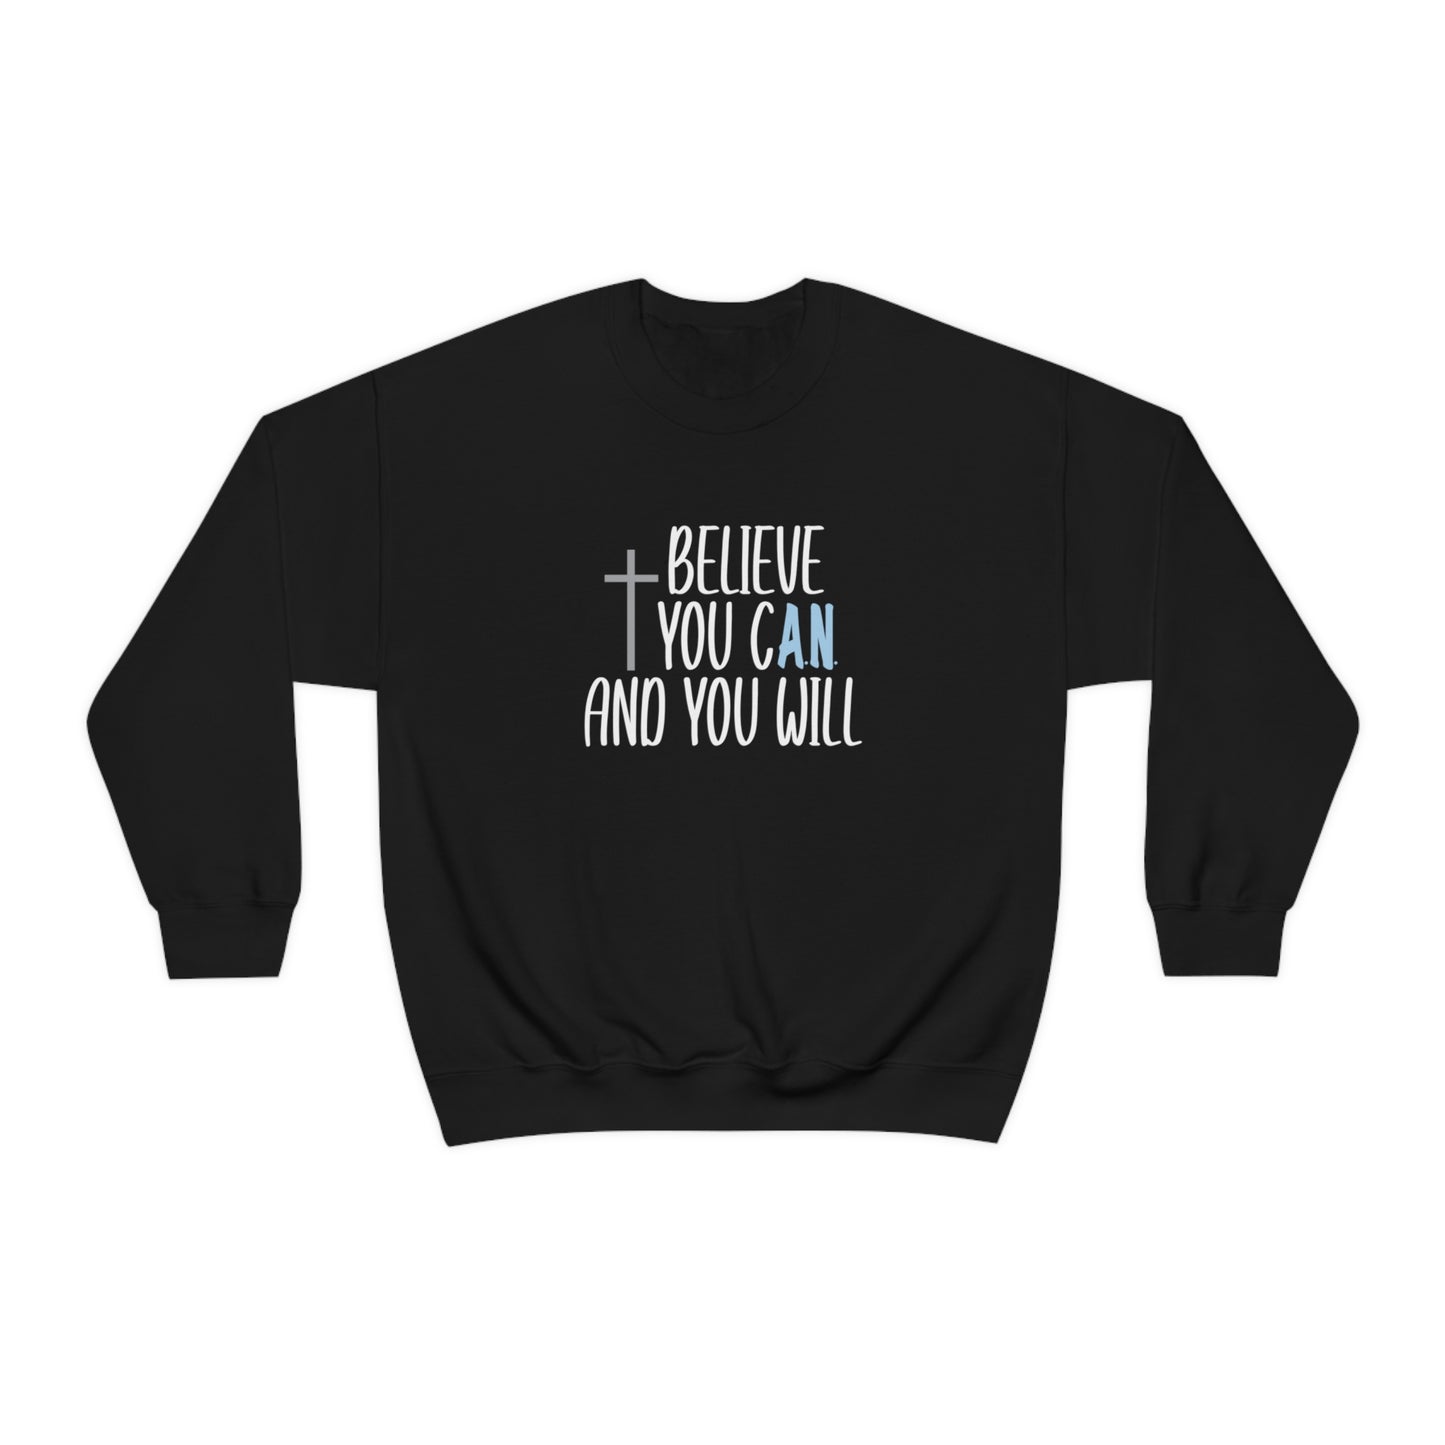 Adrianna Noriega: Believe You Can And You Will Crewneck